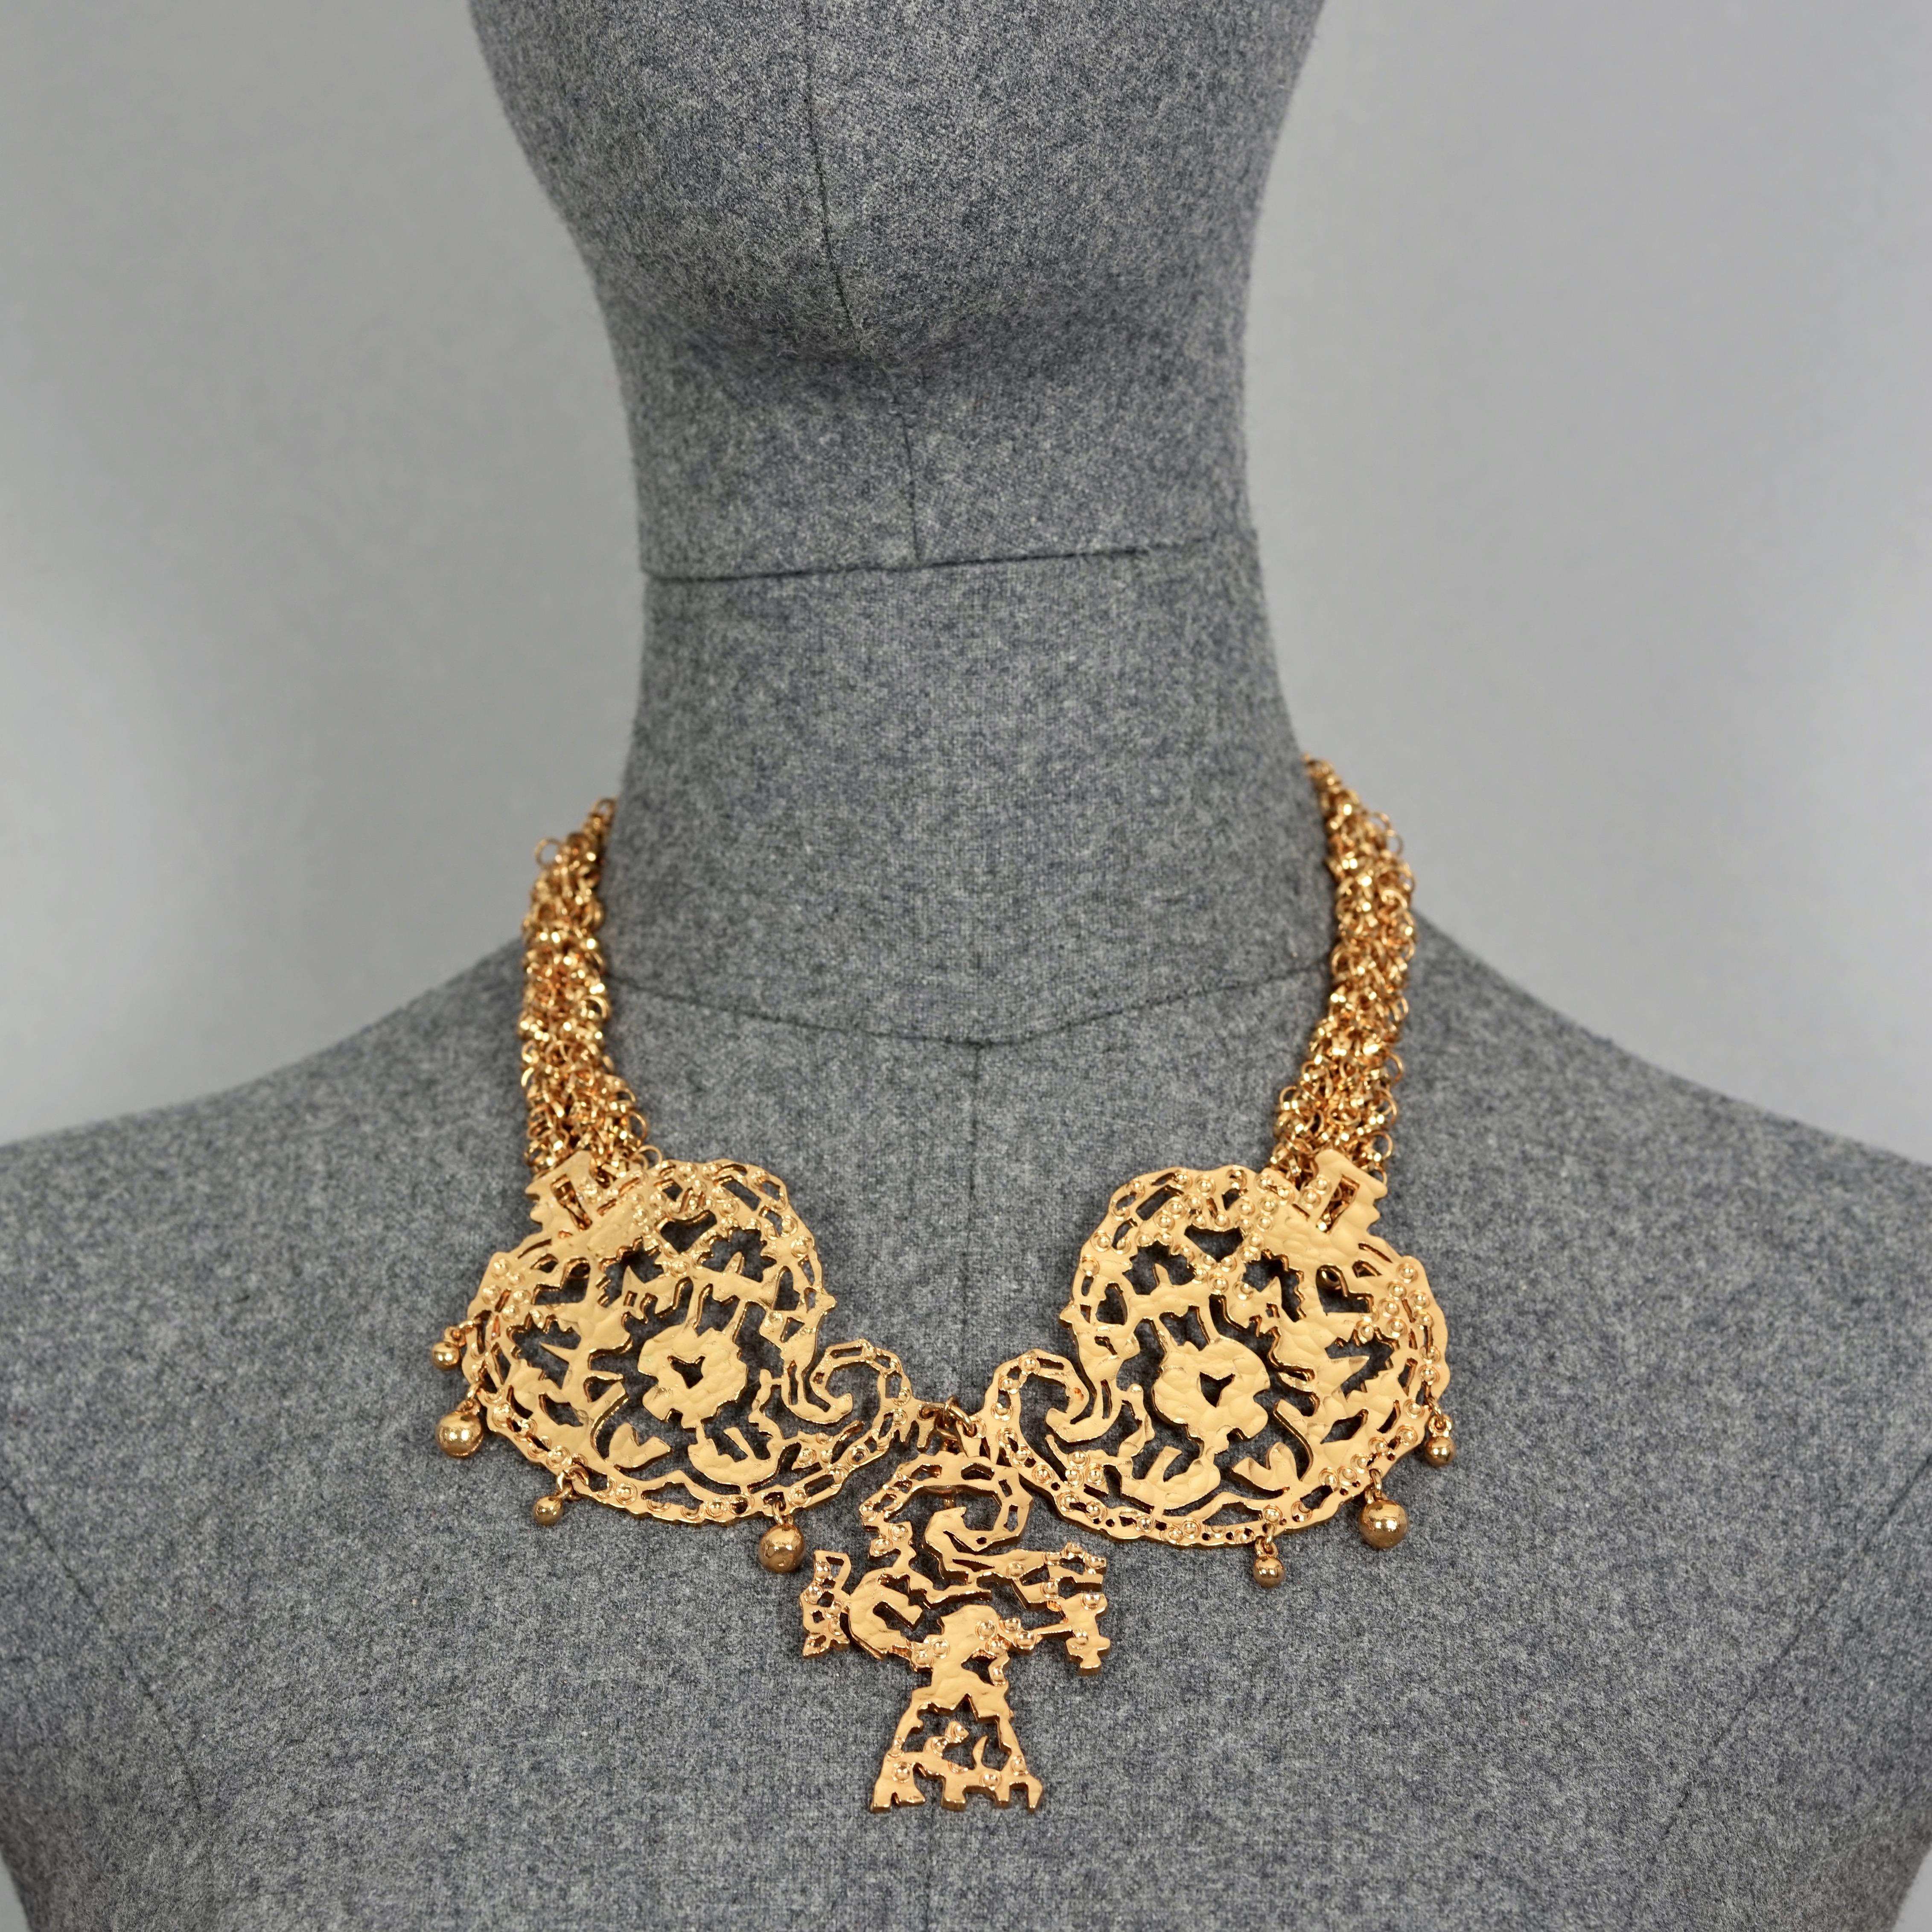 Vintage CHRISTIAN LACROIX Opulent Filigree Multi Chain Necklace

Measurements:
Height : 4.33 inches (11 cm)
Wearable Length: 19.29 inches (49 cm) to 21.65 inches (55 cm) adjustable

Features:
- 100% Authentic CHRISTIAN LACROIX.
- Hammered openwork/